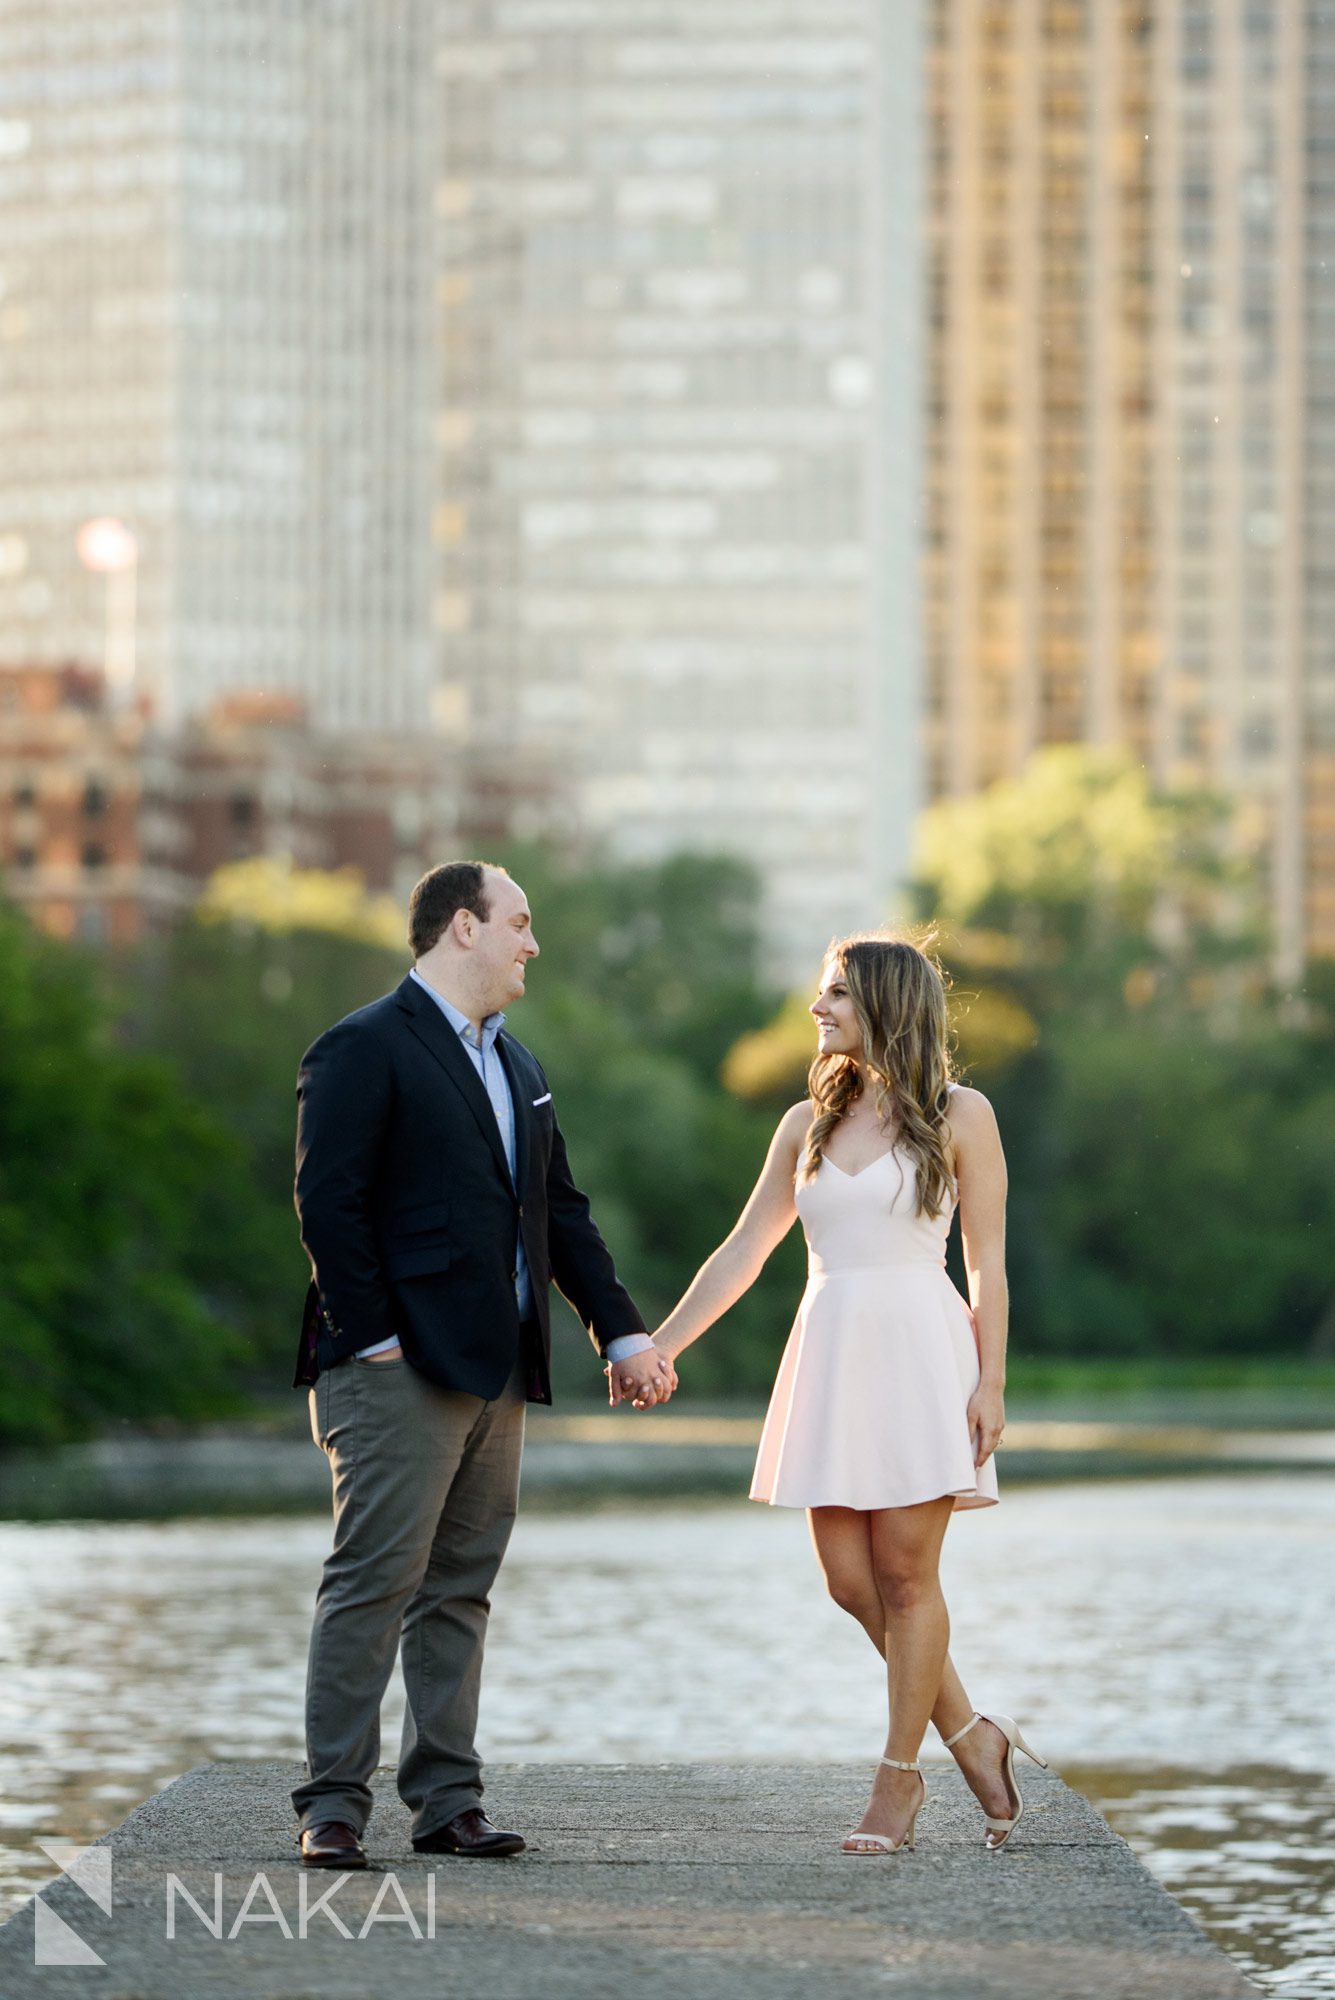 Lincoln park engagement pictures chicago